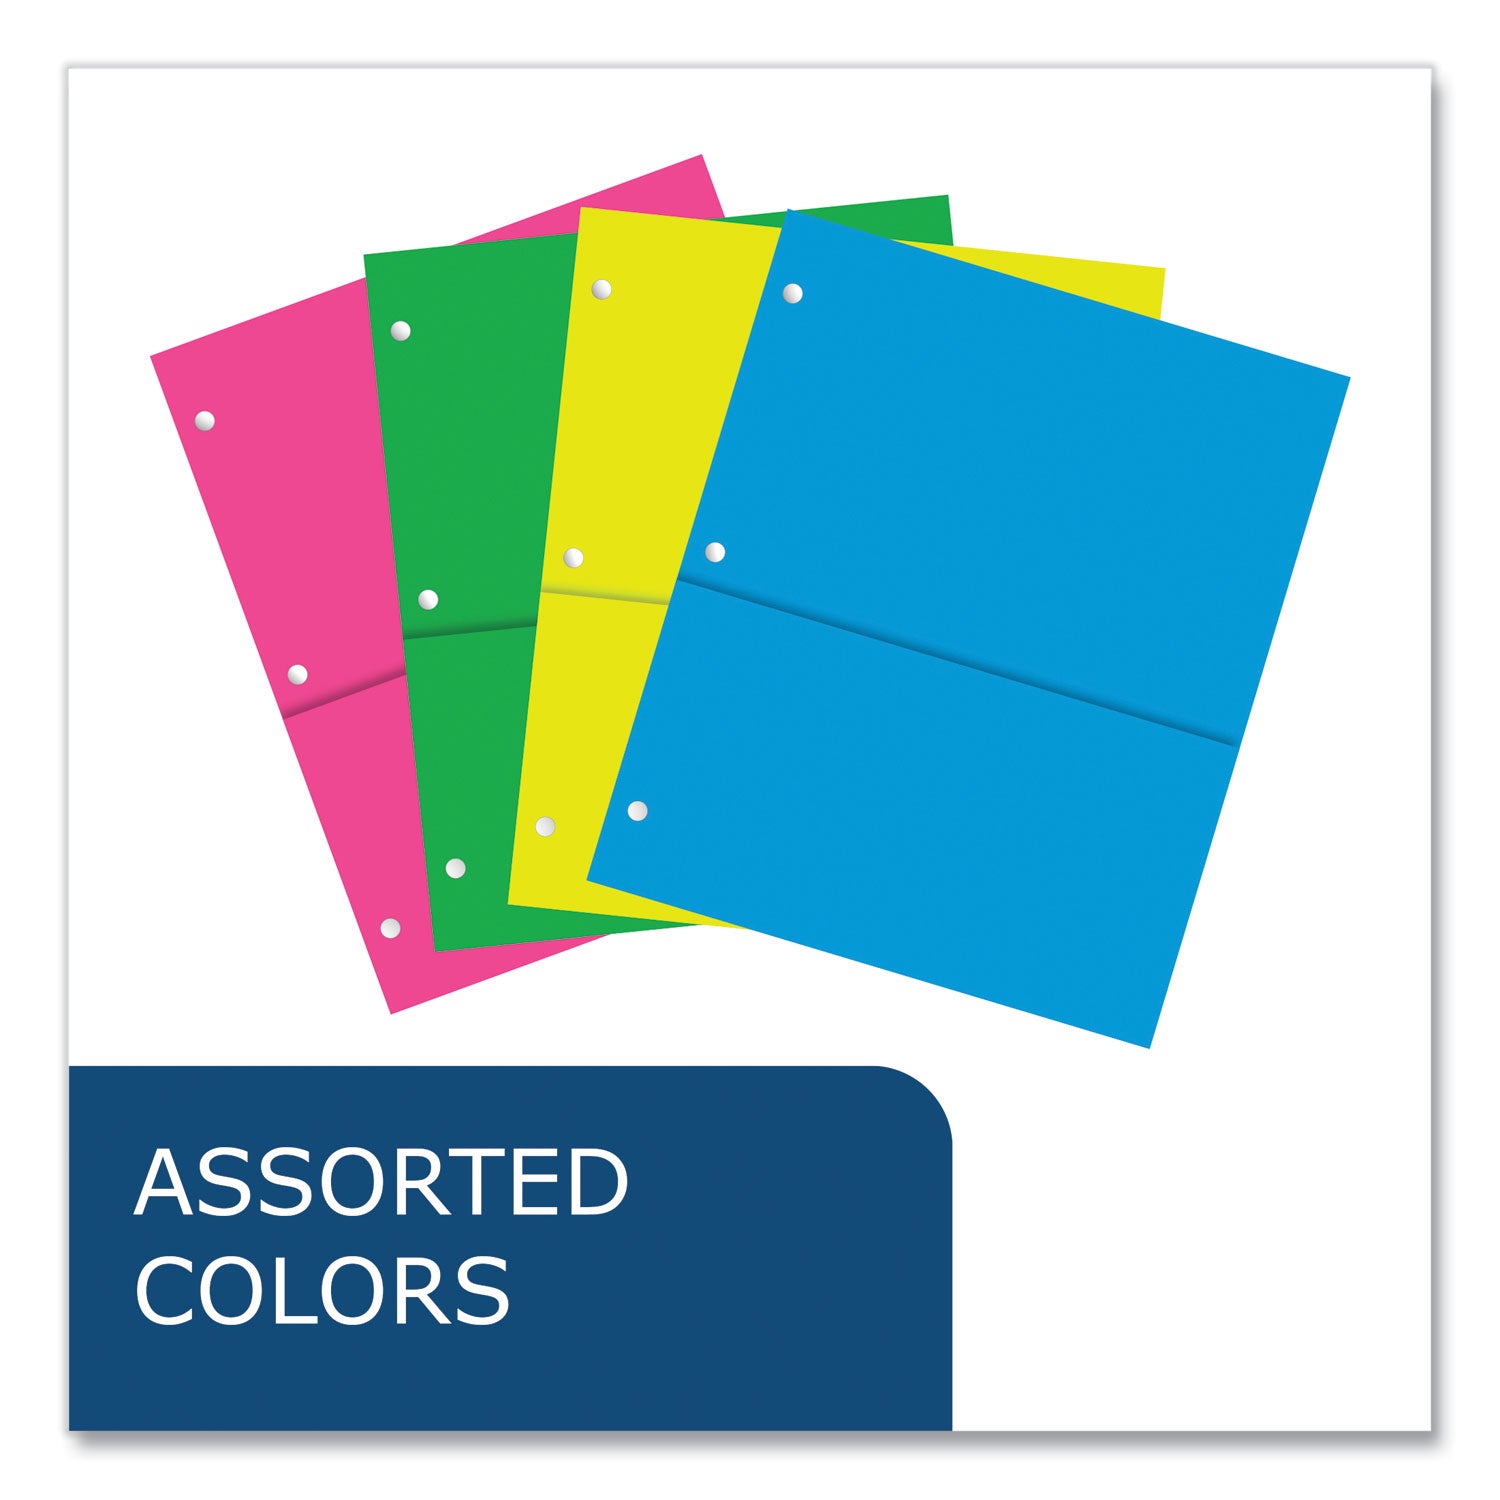 binder-pocket-9-w-x-11-h-assorted-colors-144-carton-ships-in-4-6-business-days_roa50725cs - 5